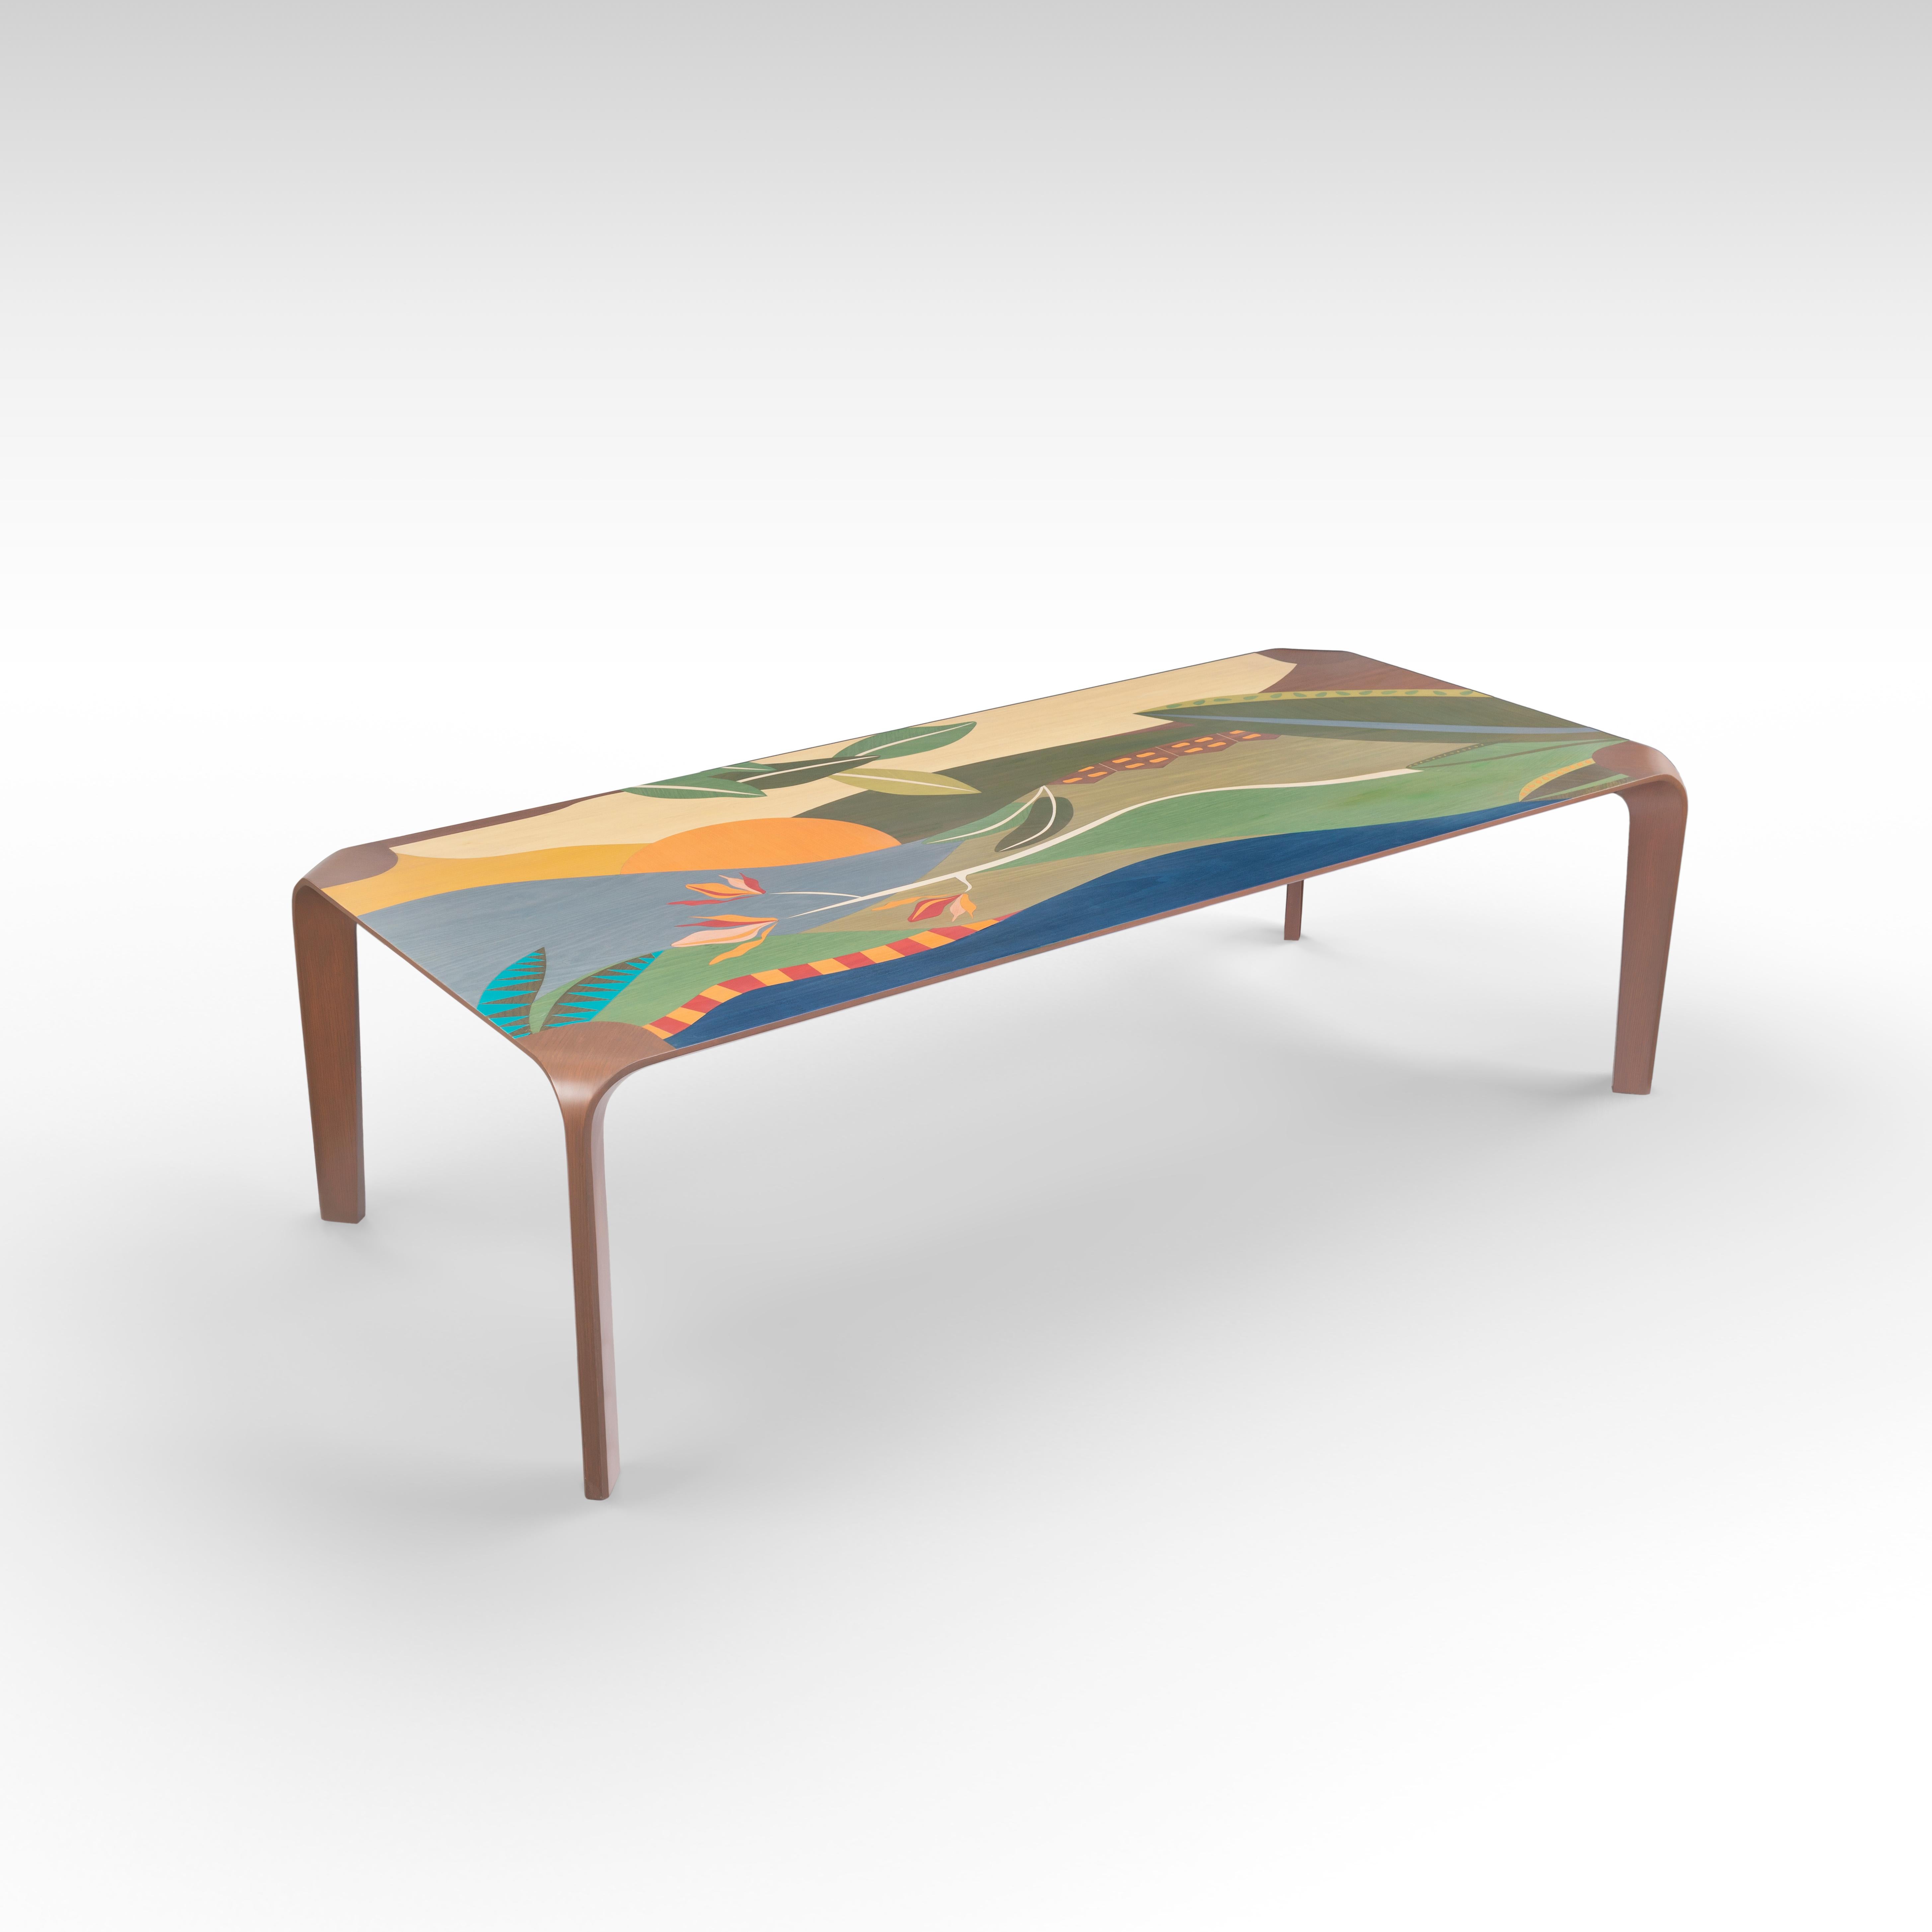 This wondrous table brings rolling dunes and beautiful sunsets right into your dining room to share with your loved ones. Delicate lines and masterfully chosen veneer colors make this piece a natural beauty. Despite the time and effort spent in